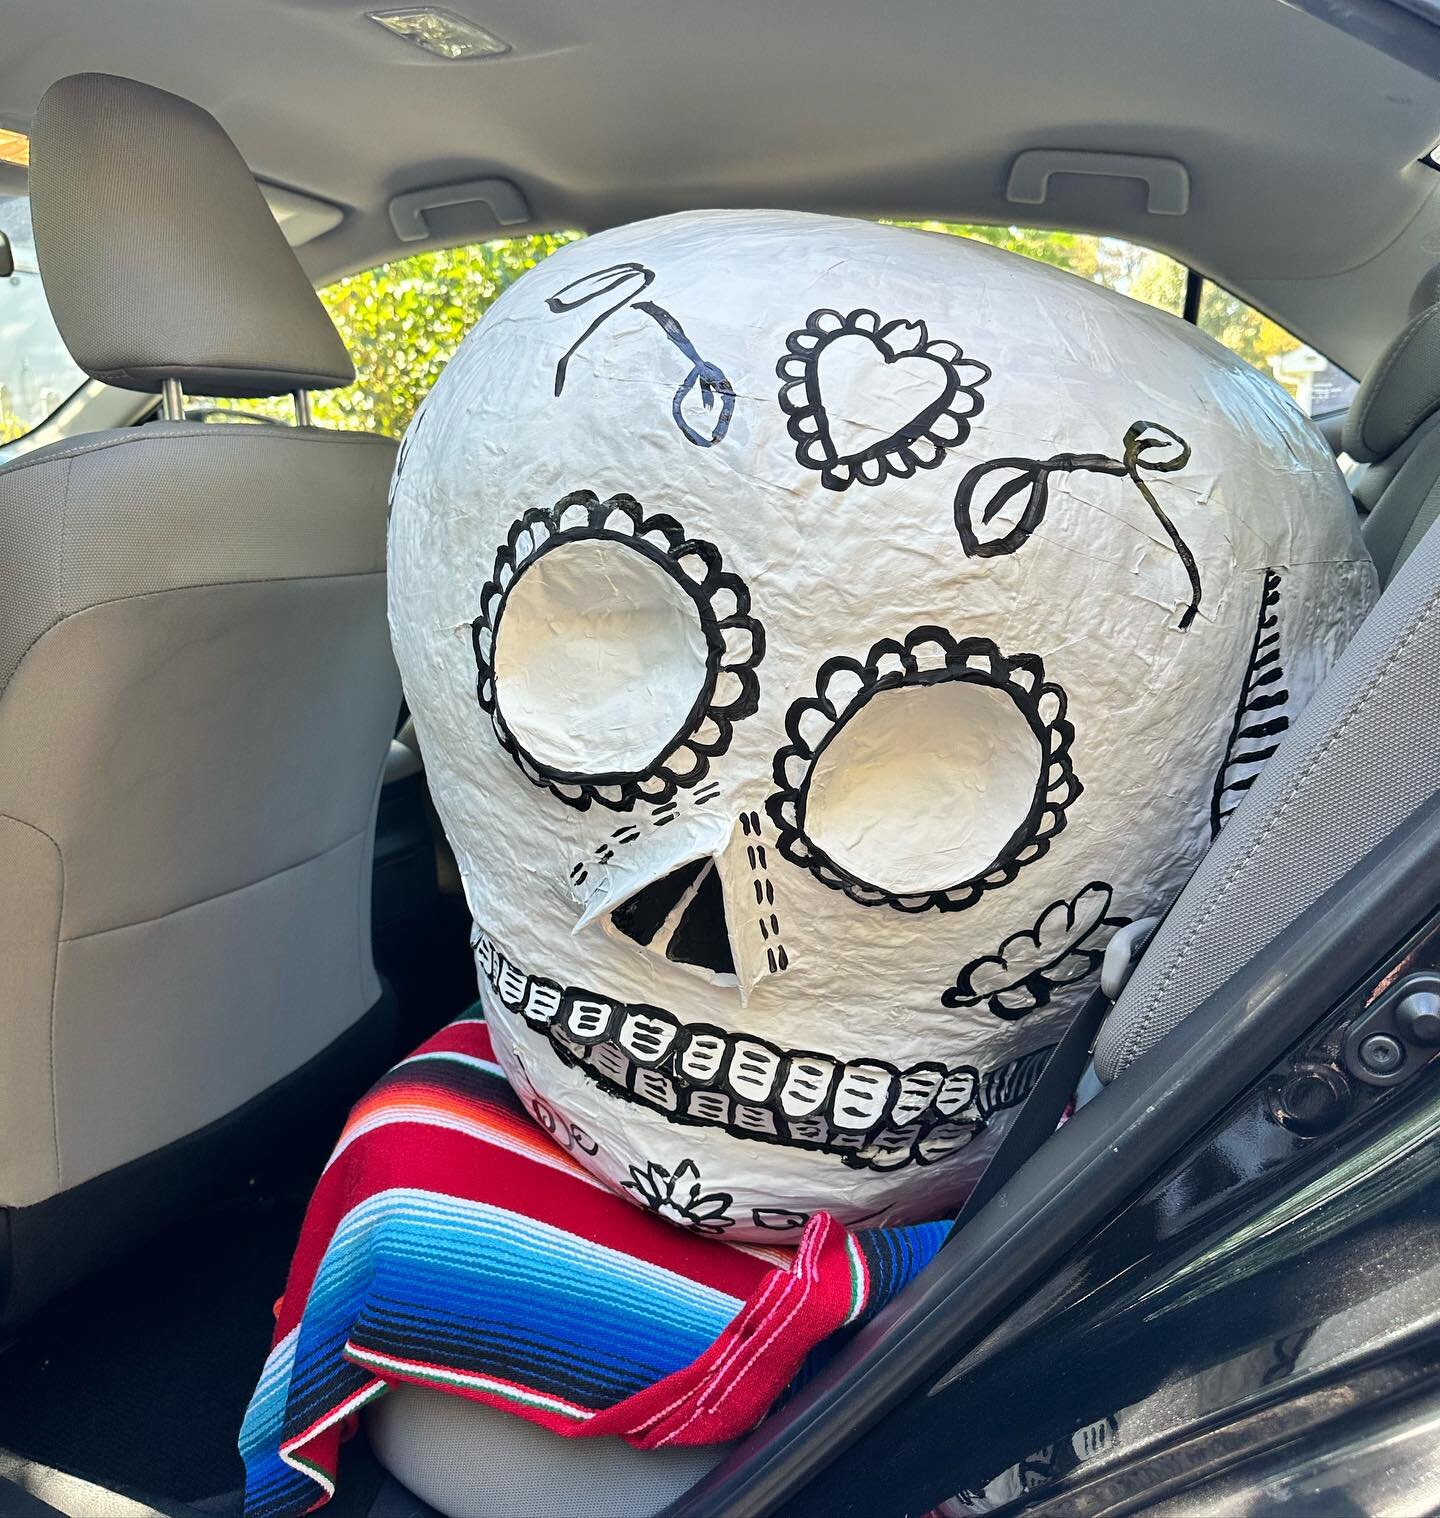 🌼🕯️ Huge shout out to the Inter Latin American Artist Collective (ILAAC) for facilitating this project and to the Rubinstein Arts Center for commissioning these calaveras. 

🌼🕯️ Un gran agradecimiento al Inter Latin American Artist Collective por